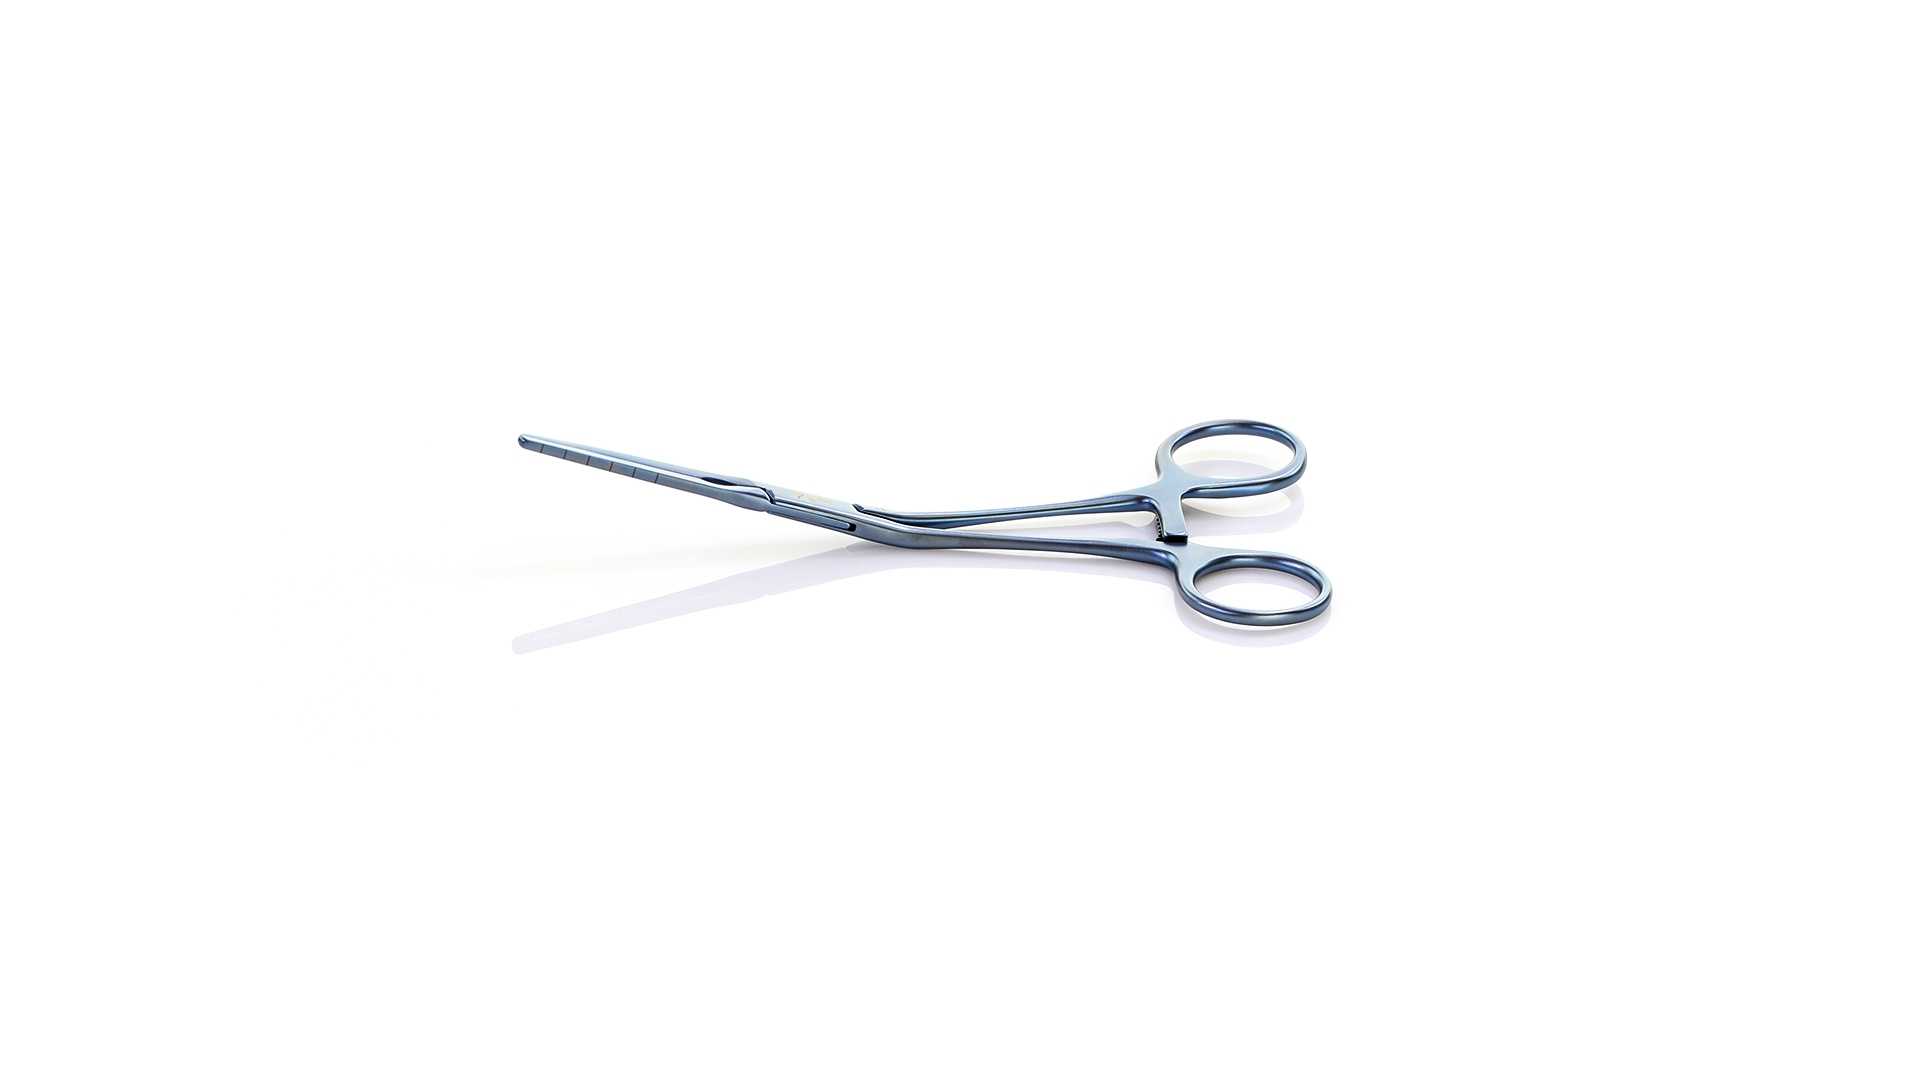 Cooley Pediatric Clamp - 42.5mm straight Cooley Atraumatic jaws